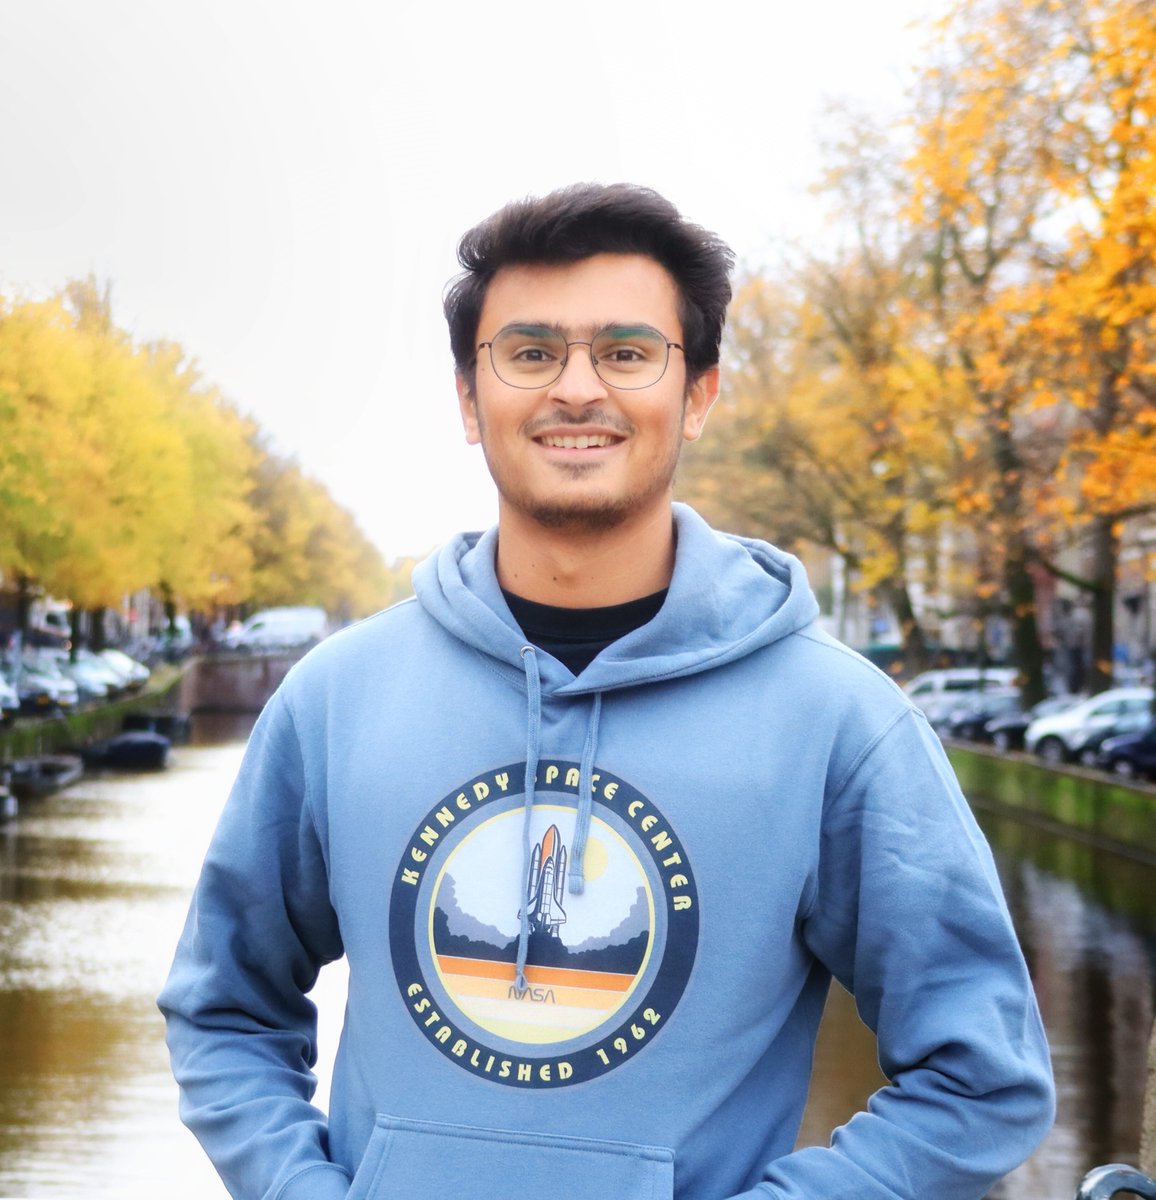 It's graduation season and #MissionToPsyche is excited to congratulate recent grad, Niketan Chandarana! As our computer programing & outreach intern he handled everything from mentoring capstone students to helping the public try our immersive VR experiences at events. Congrats🥳